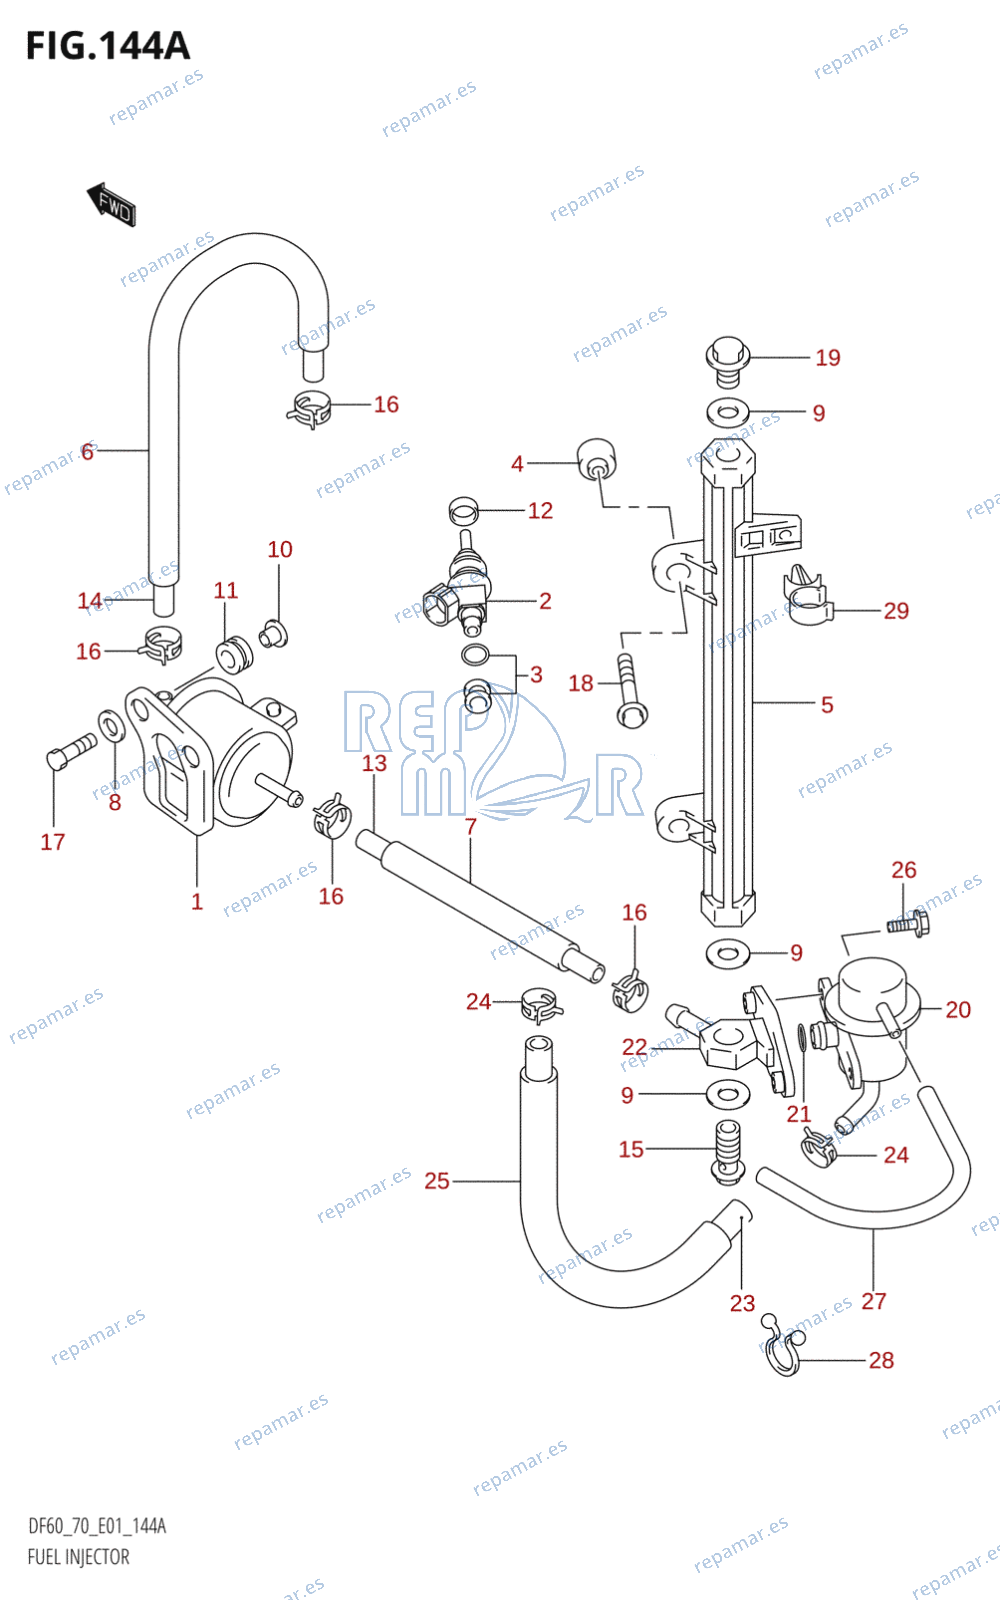 144A - FUEL INJECTOR (W,X)